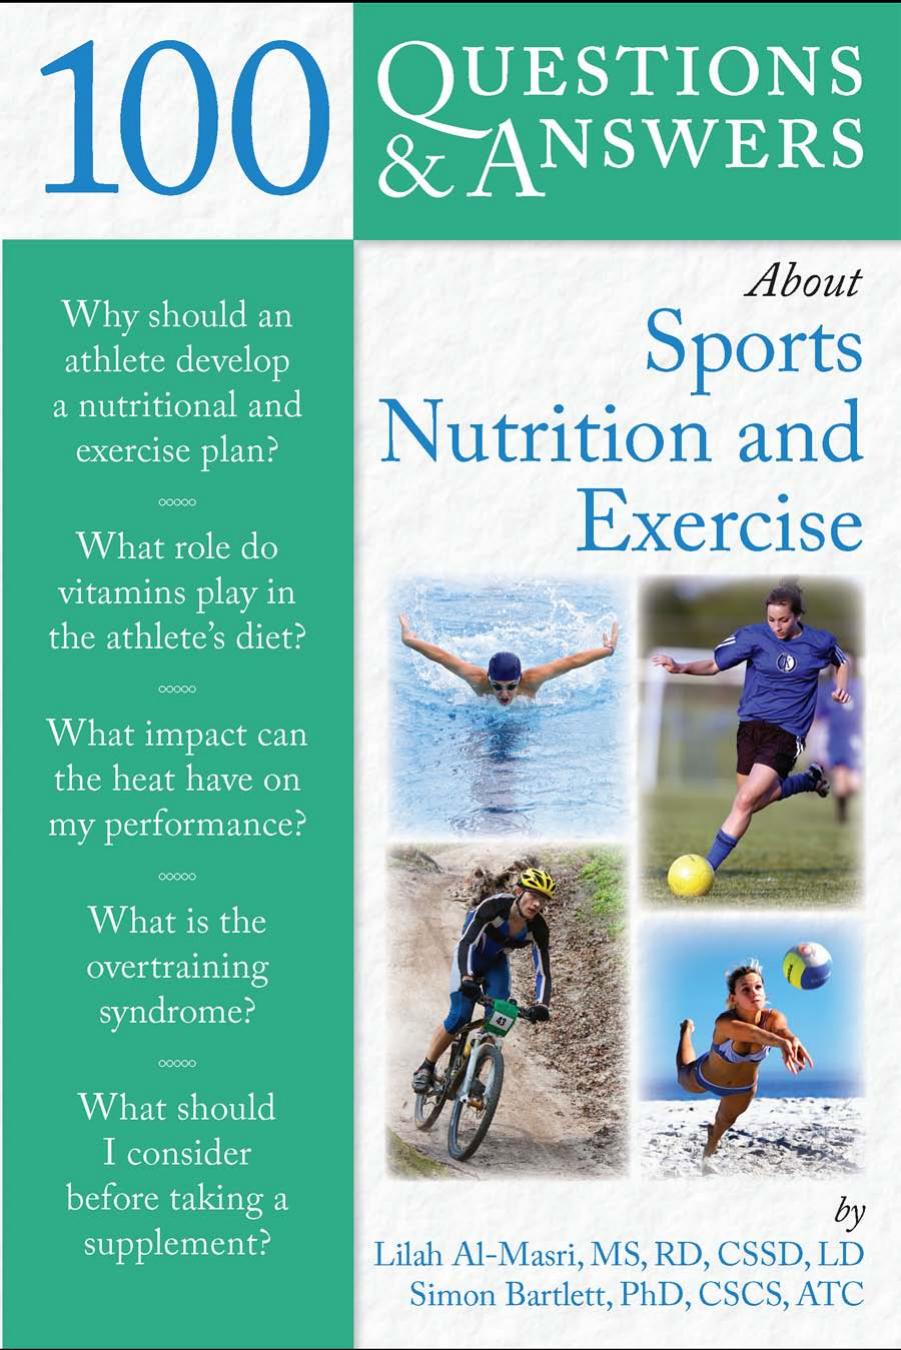 100 Questions and Answers About Sports Nutrition and Exercise by Lilah Al-Masri Simon Bartlett